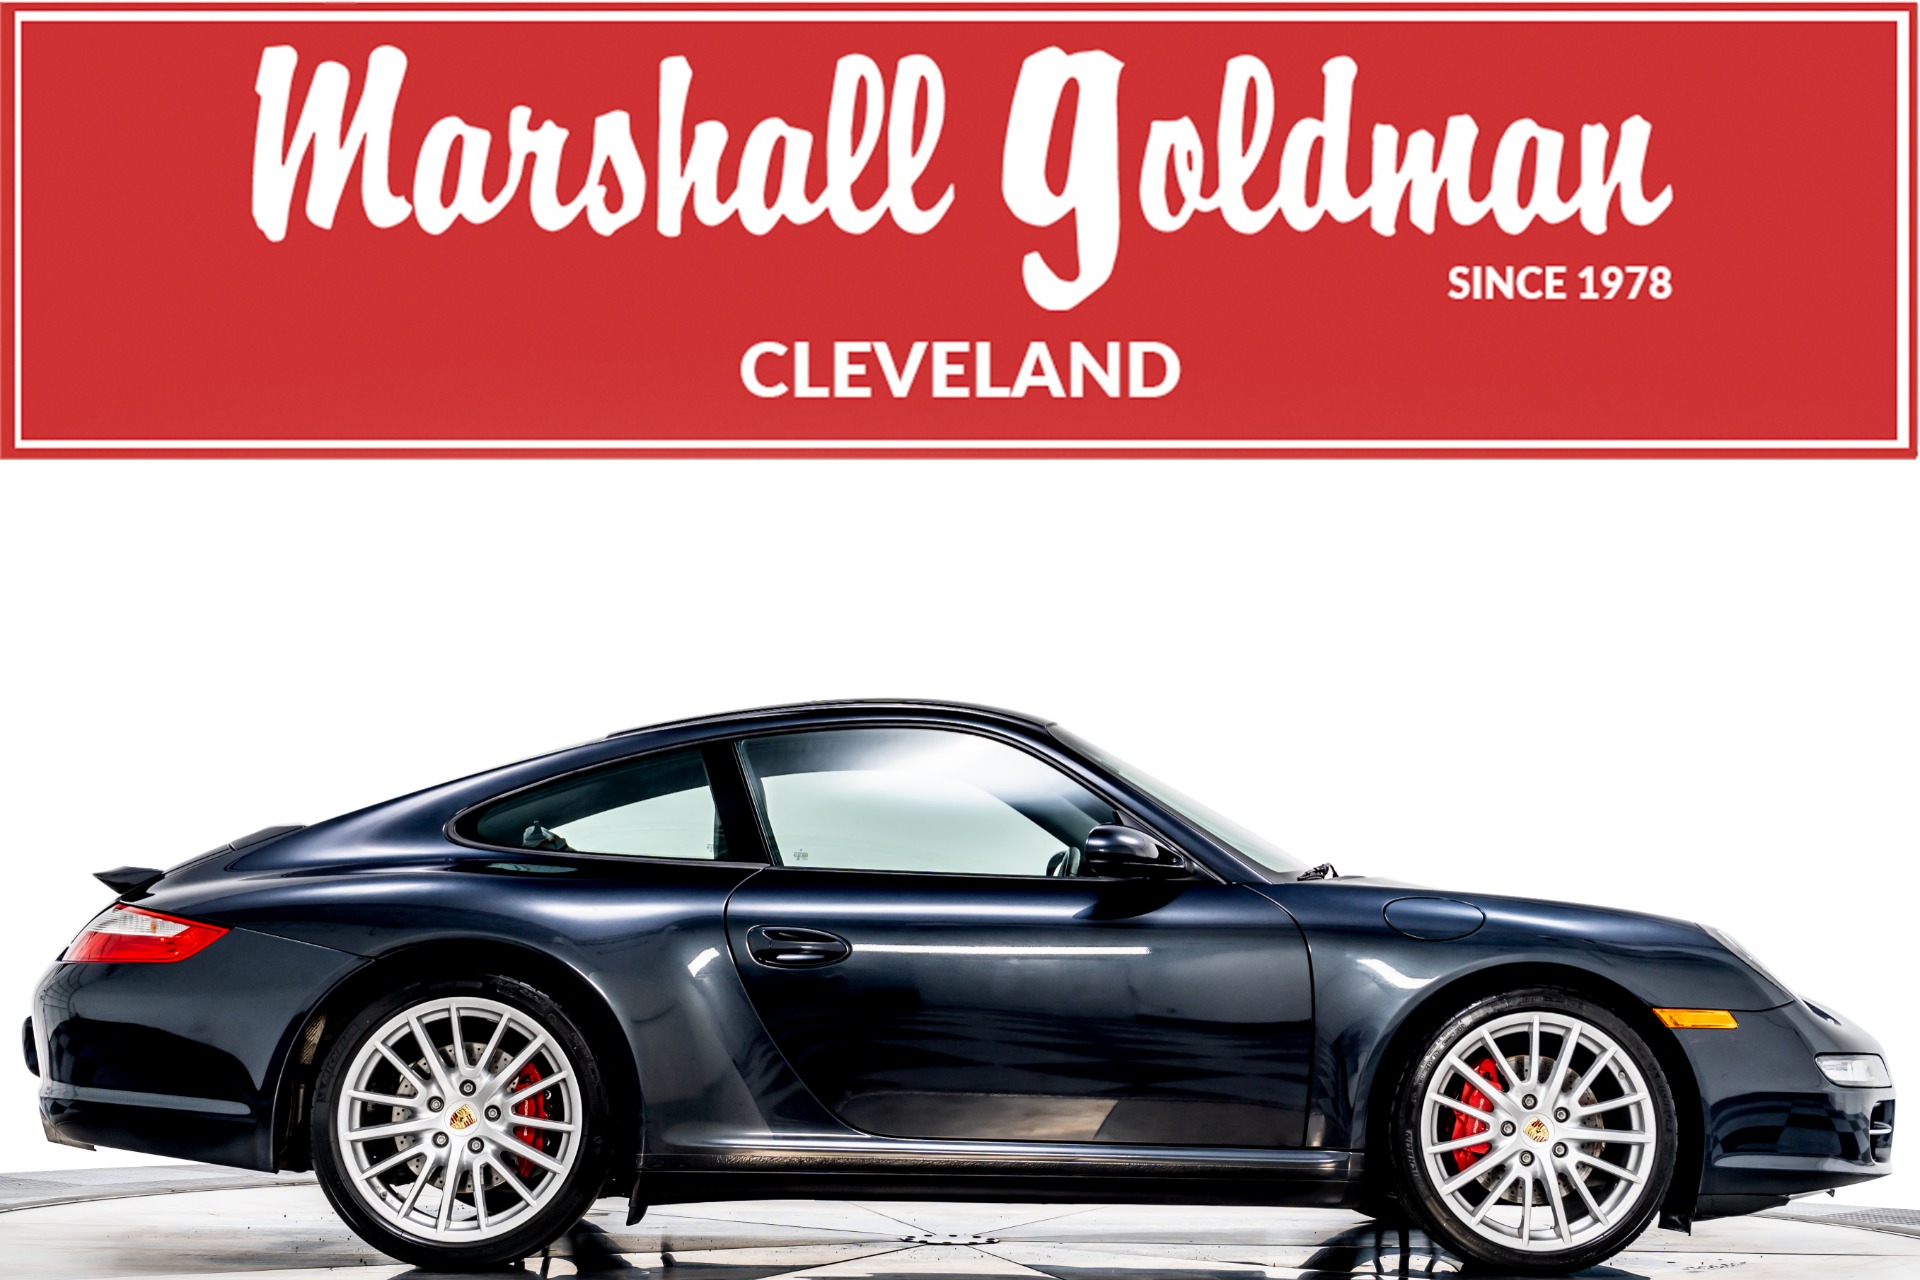 Used 2008 Porsche 911 Carrera S For Sale (Sold) | Marshall Goldman Motor  Sales Stock #W20901